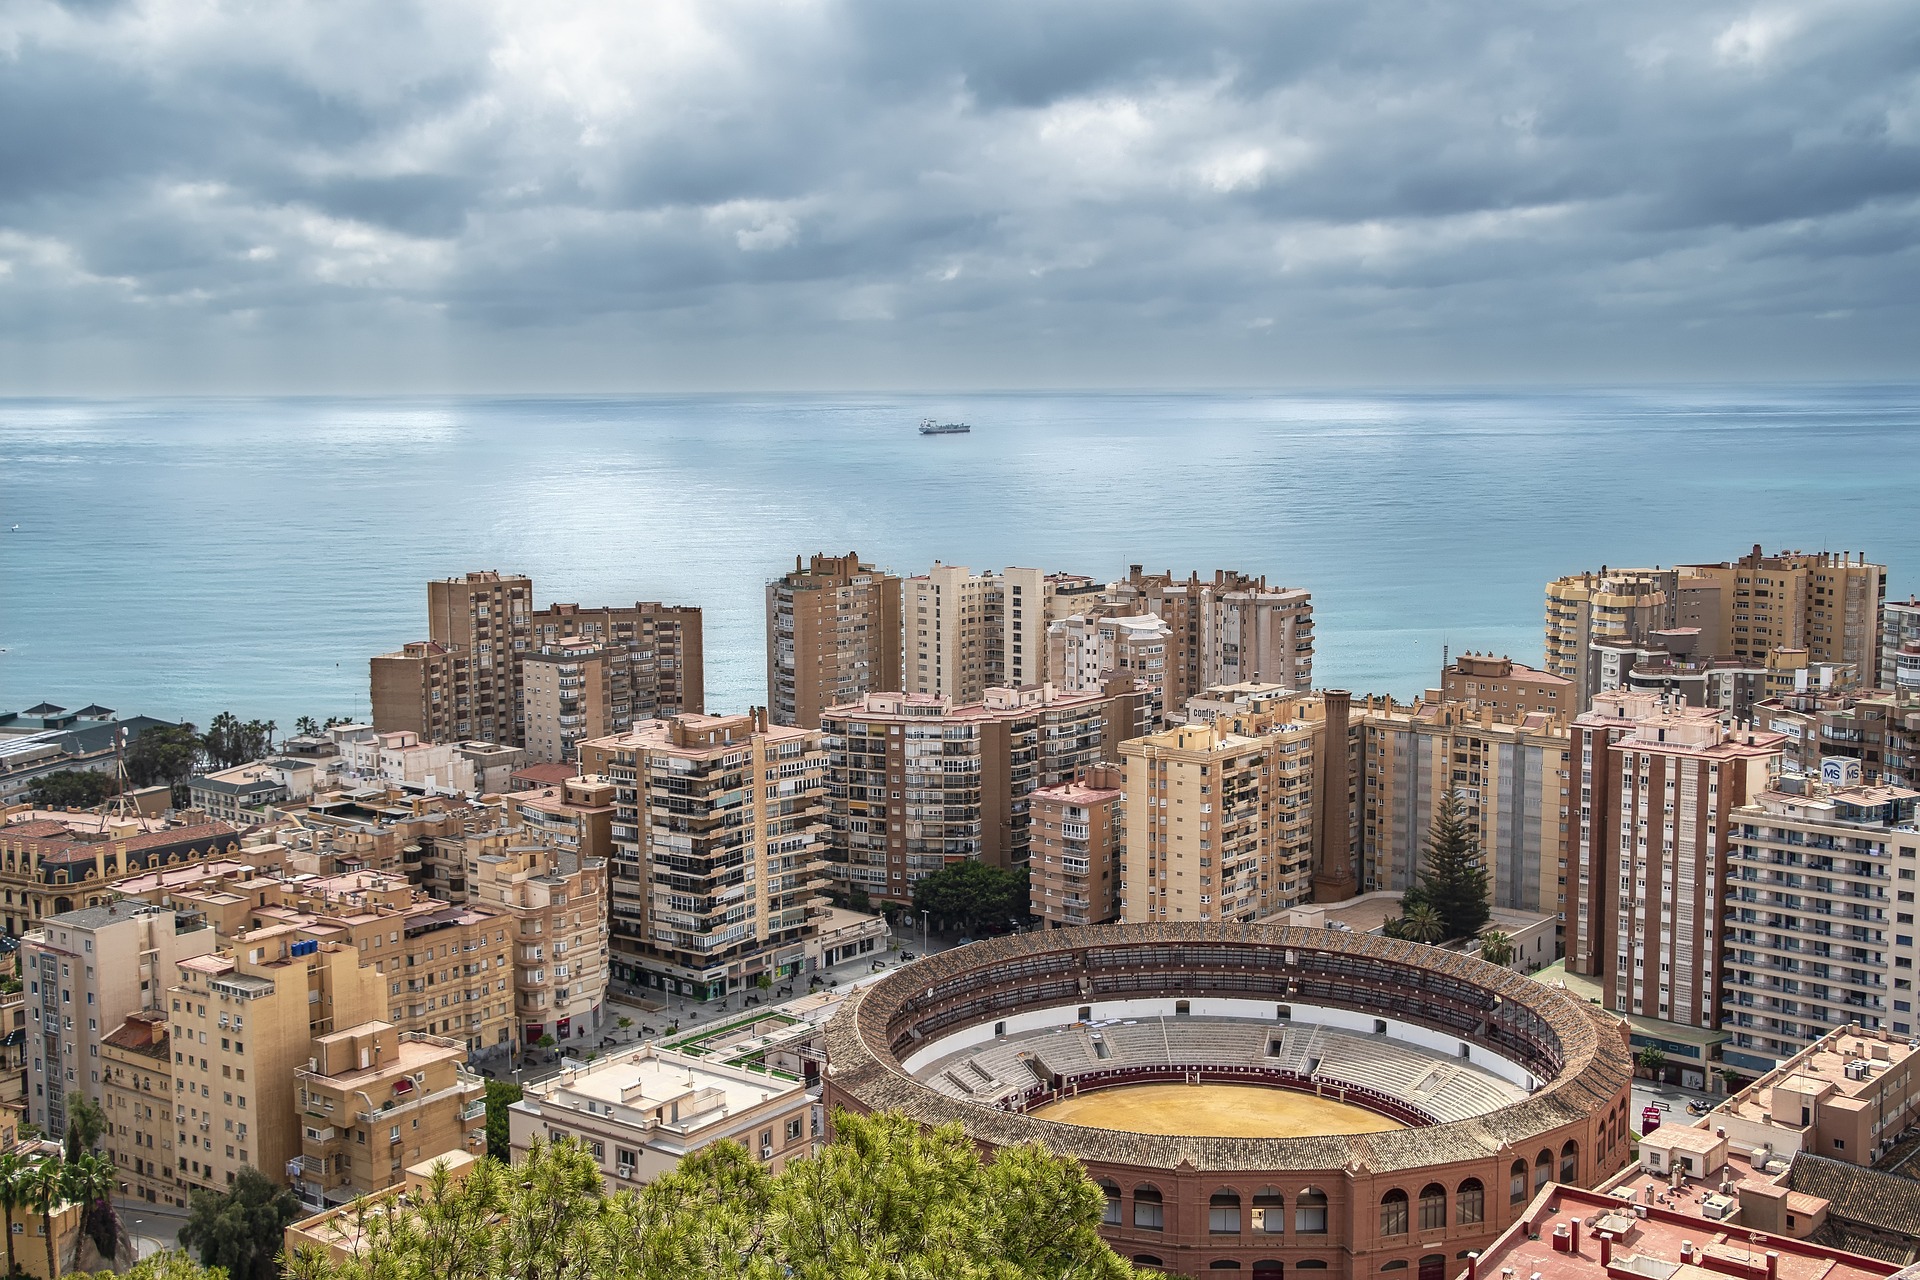 Relocating to Malaga: Here’s What You Need to Know